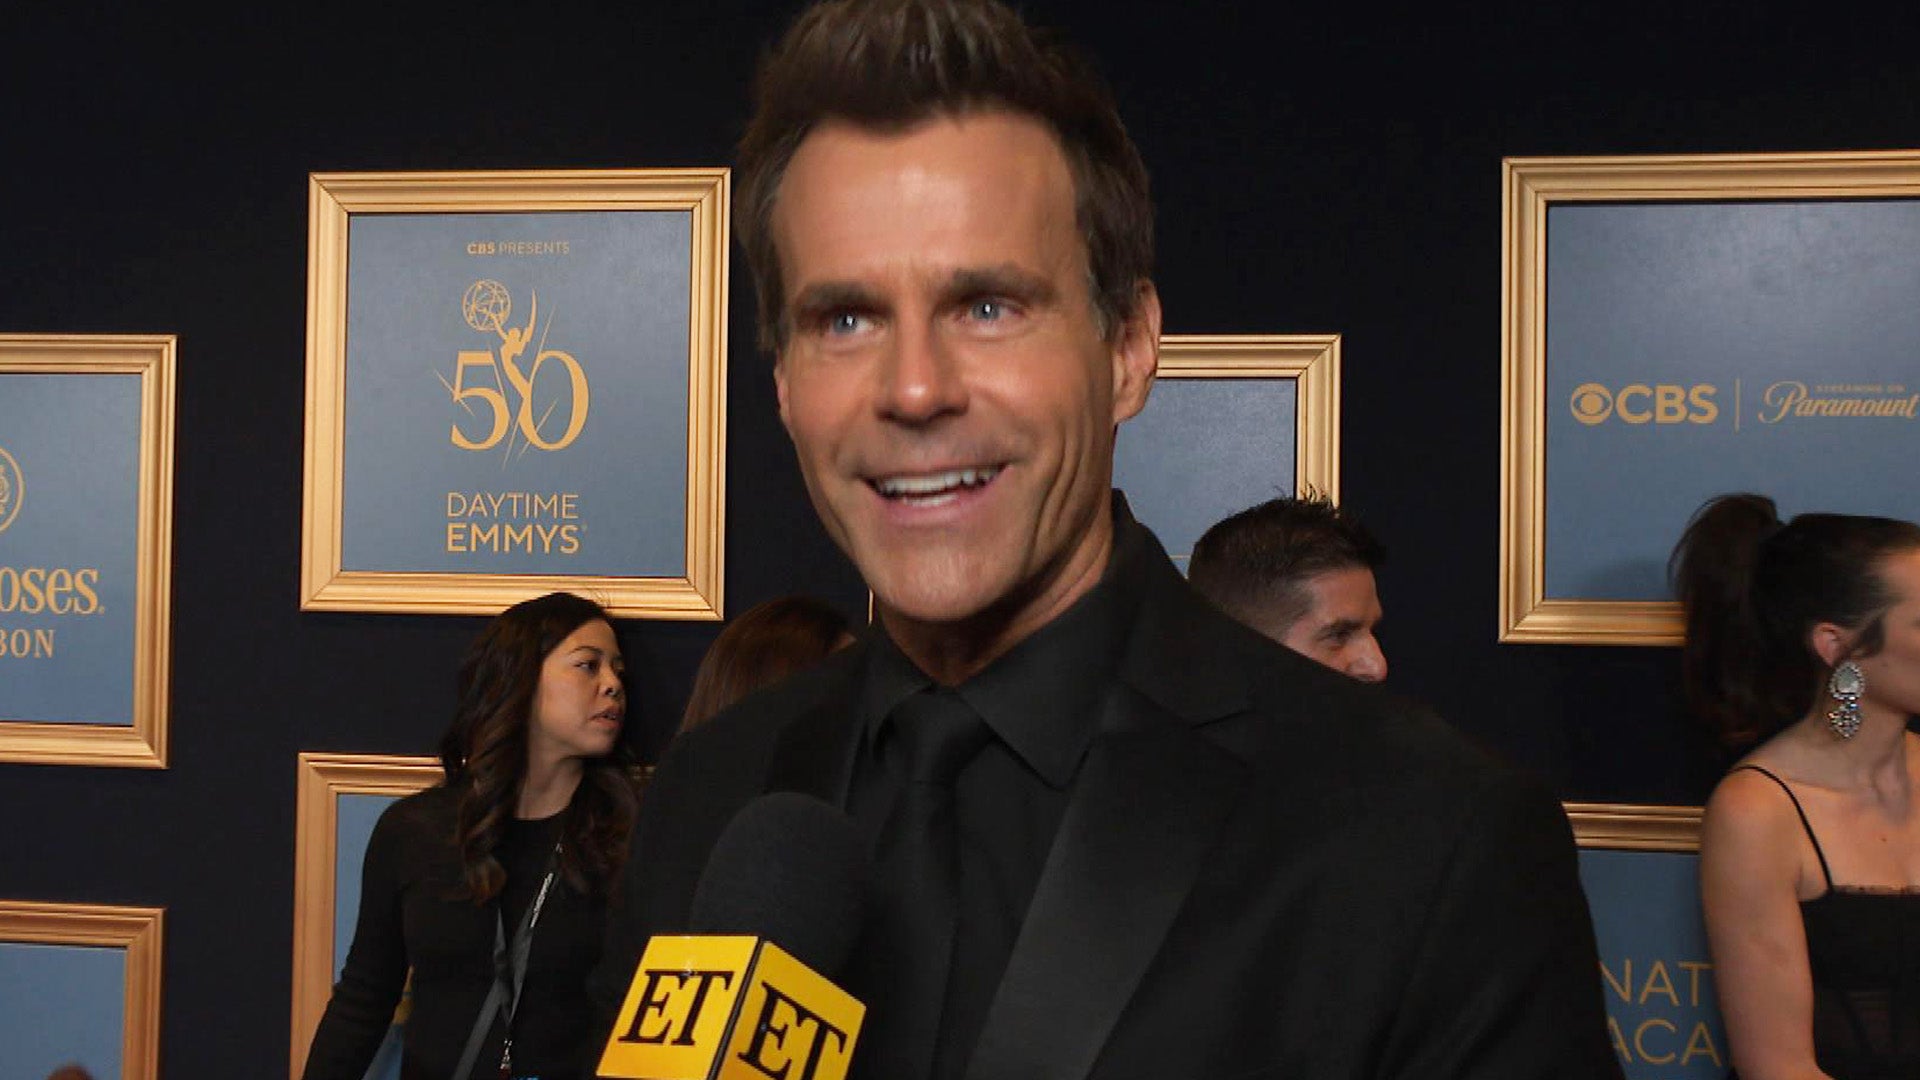 Cameron Mathison Gives Health Update and Shares What's Next for Him in